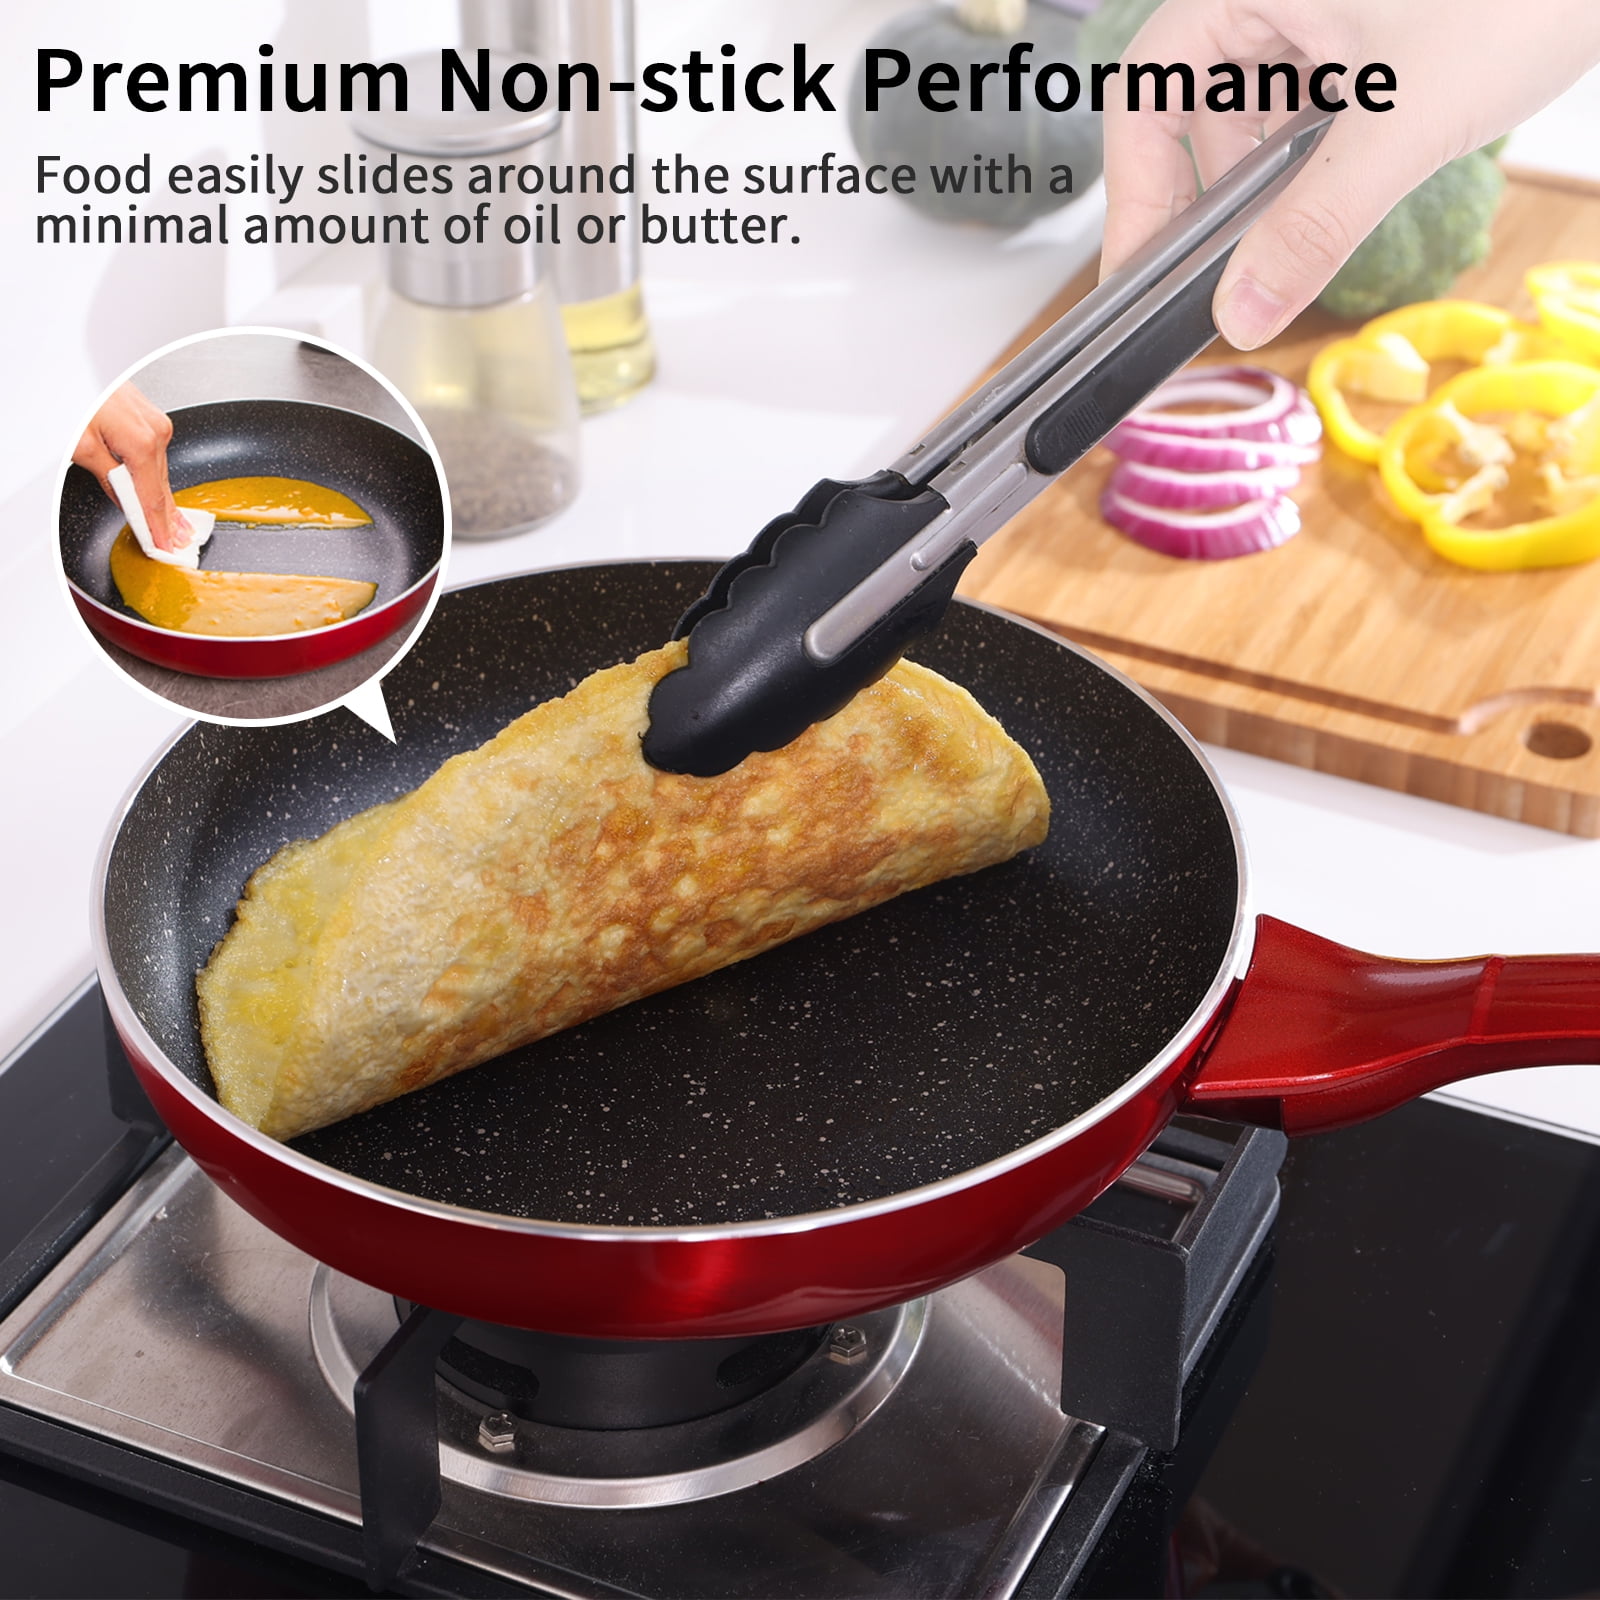 Woll Nowo Titanium Fry Pan with Detachable Handle, 11-Inch